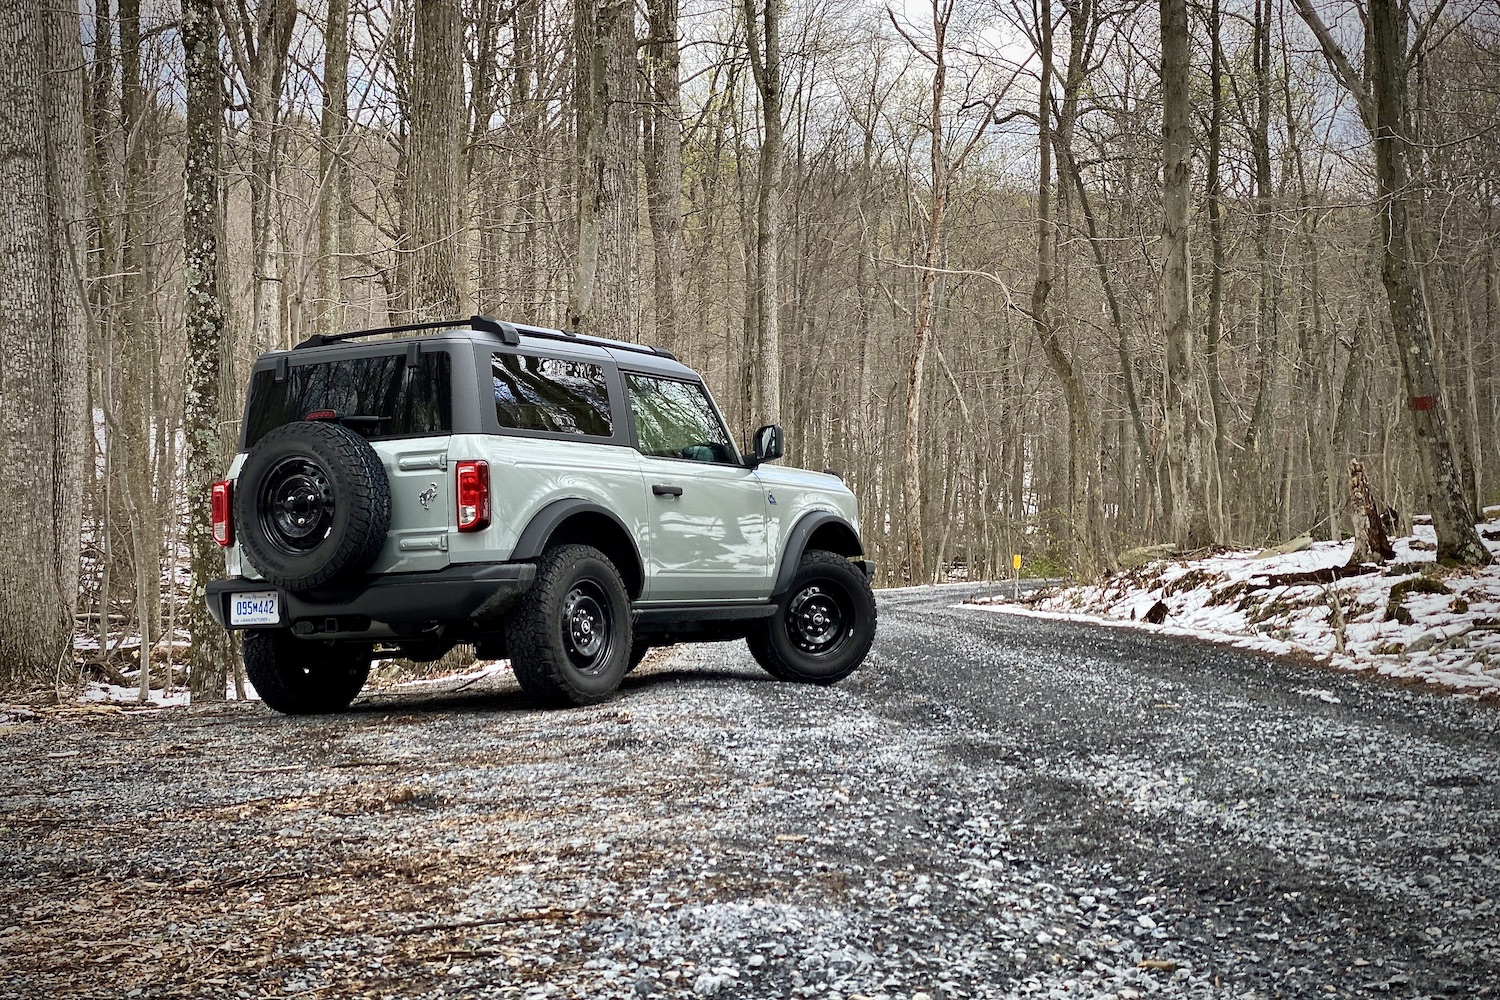 Rear end angle of 2021 Ford Bronco on a gravel trail with trees and snow in the back on a gloomy day.